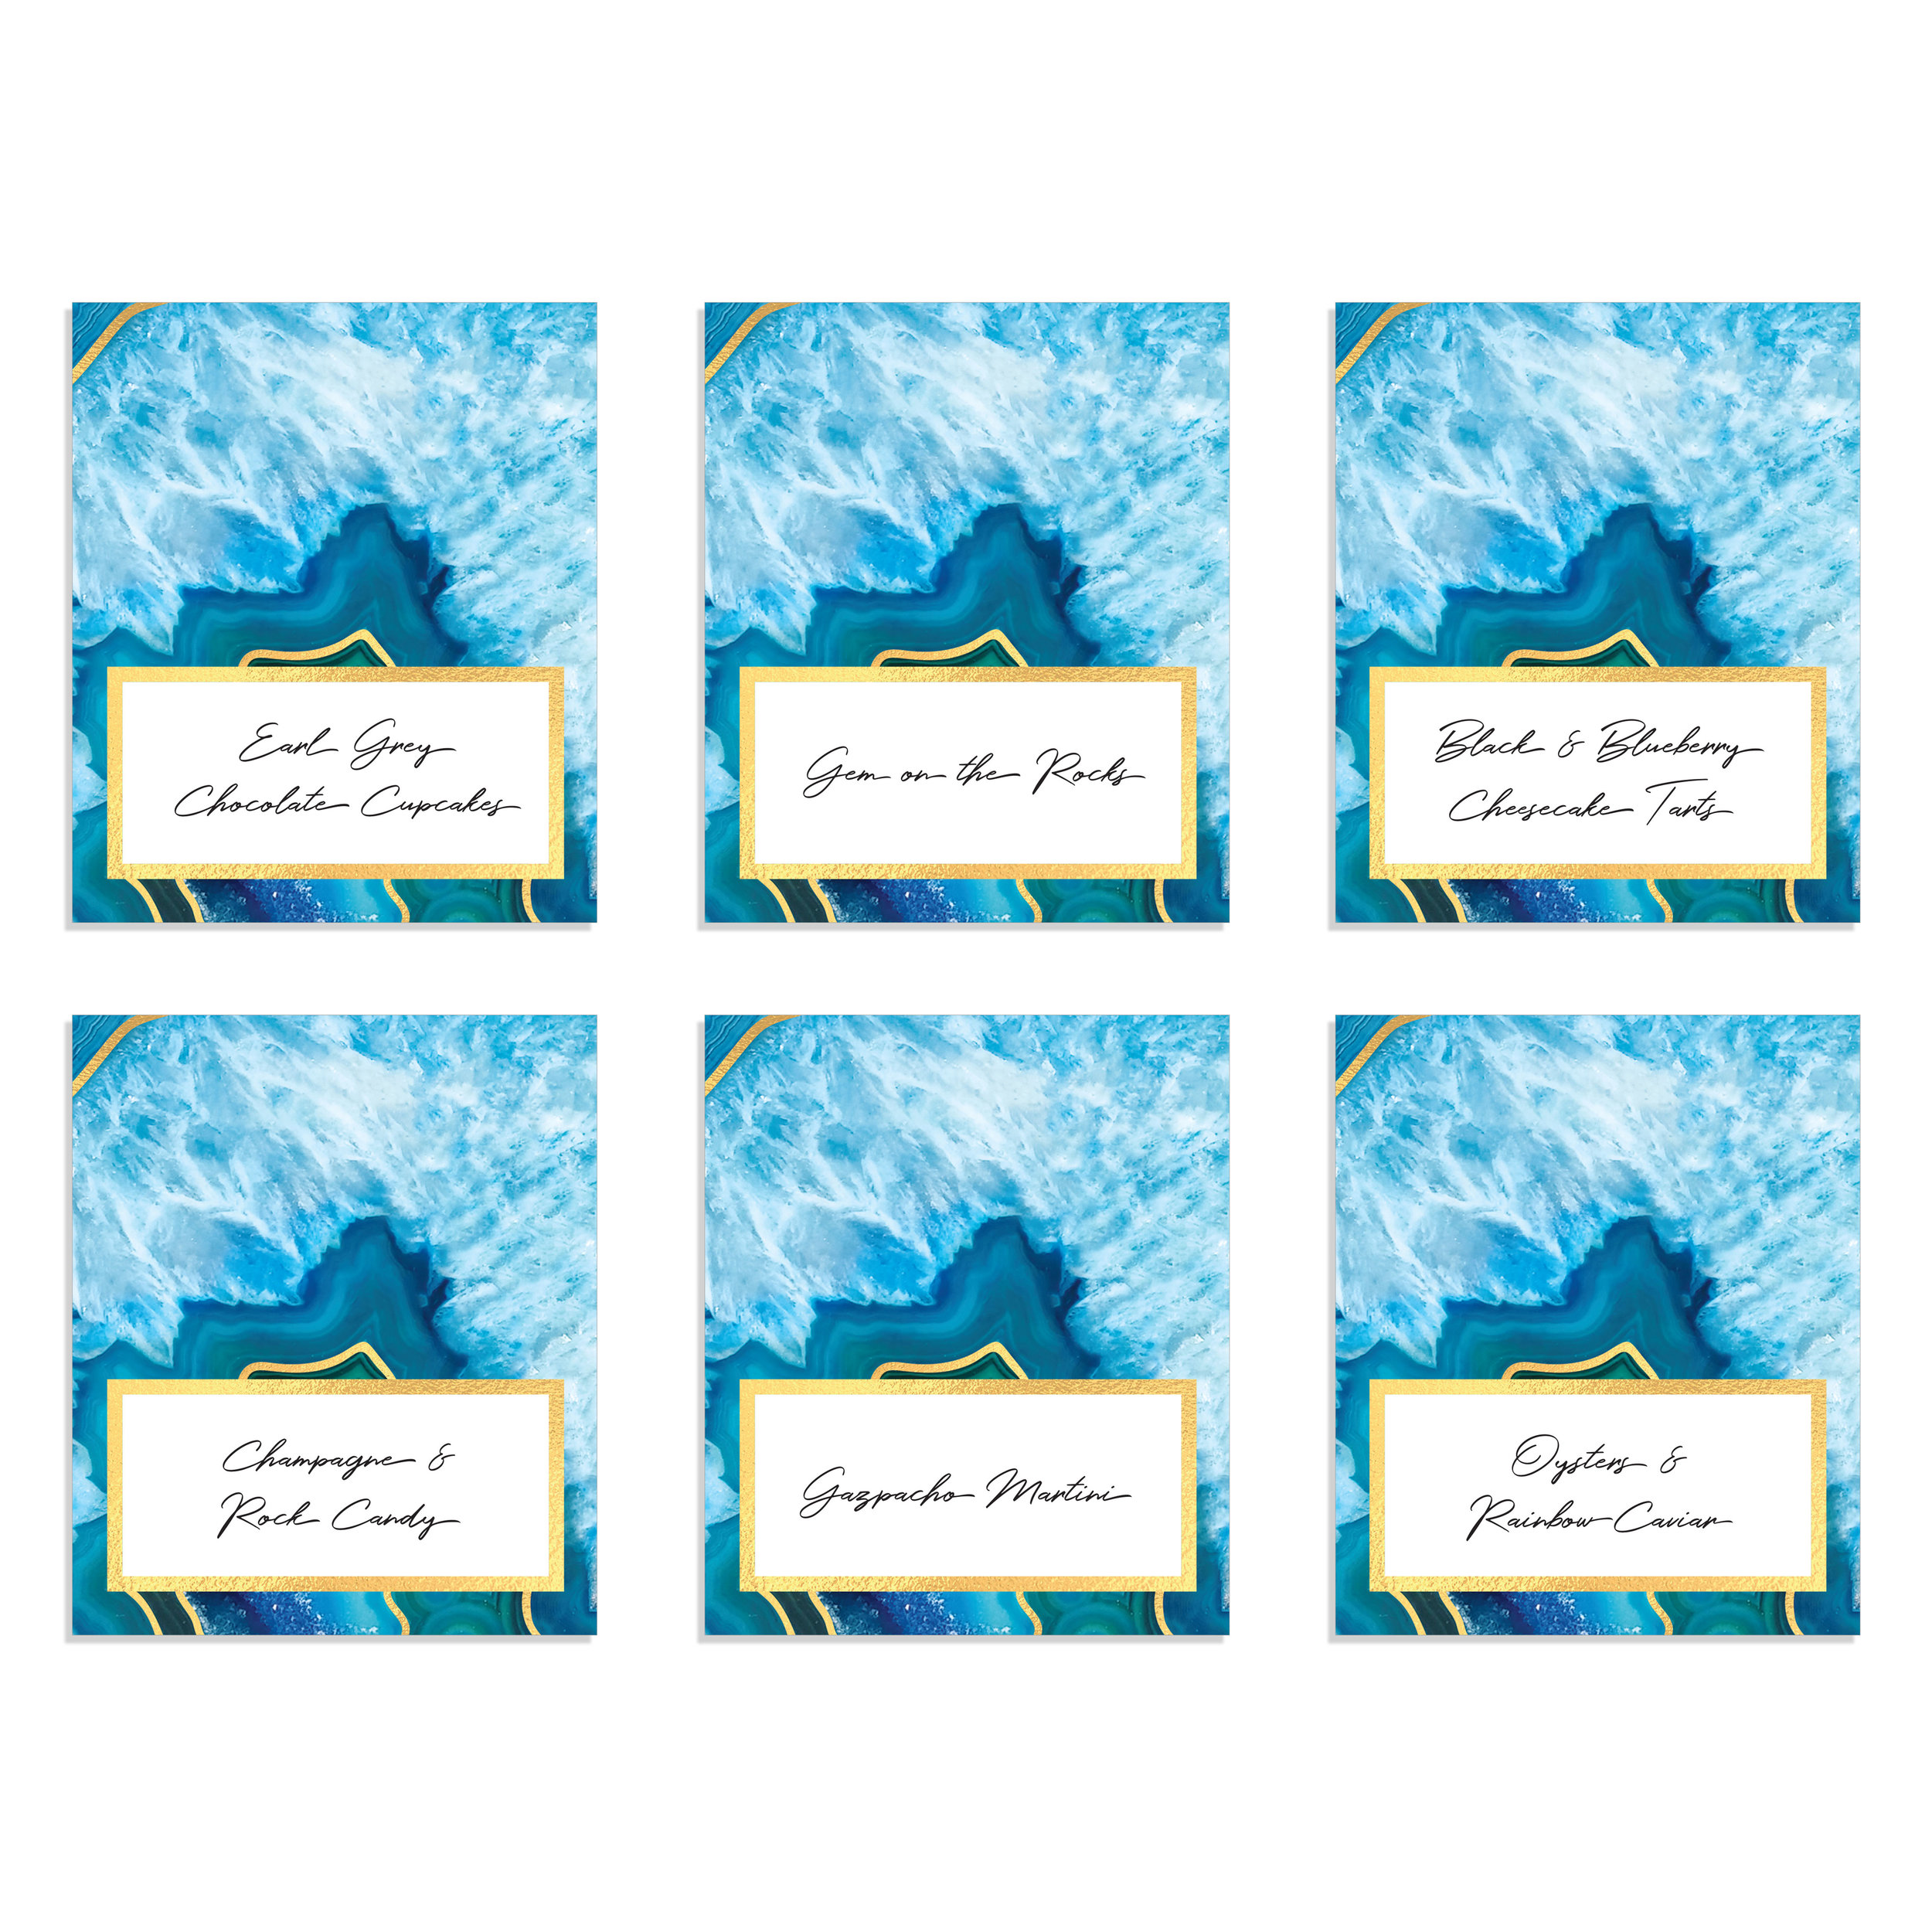 Editable Tent Cards / Place Cards